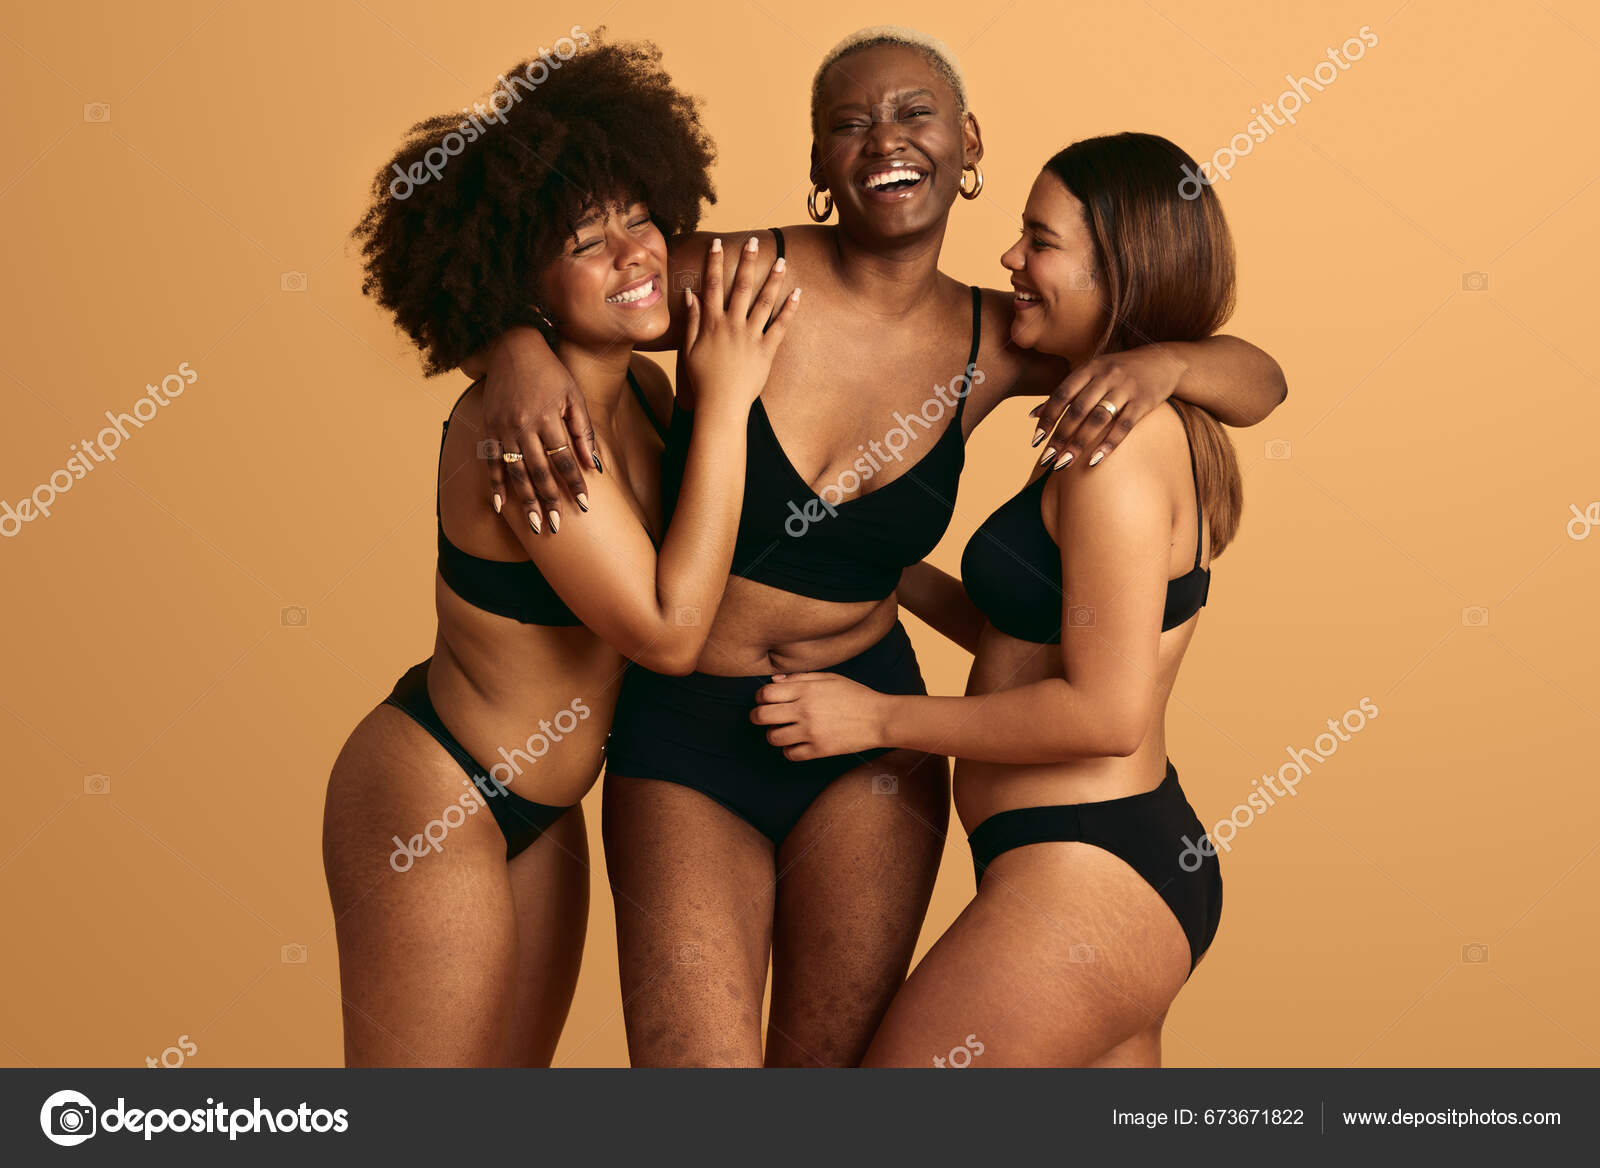 Free: Multiracial group of young women wearing bras embracing and